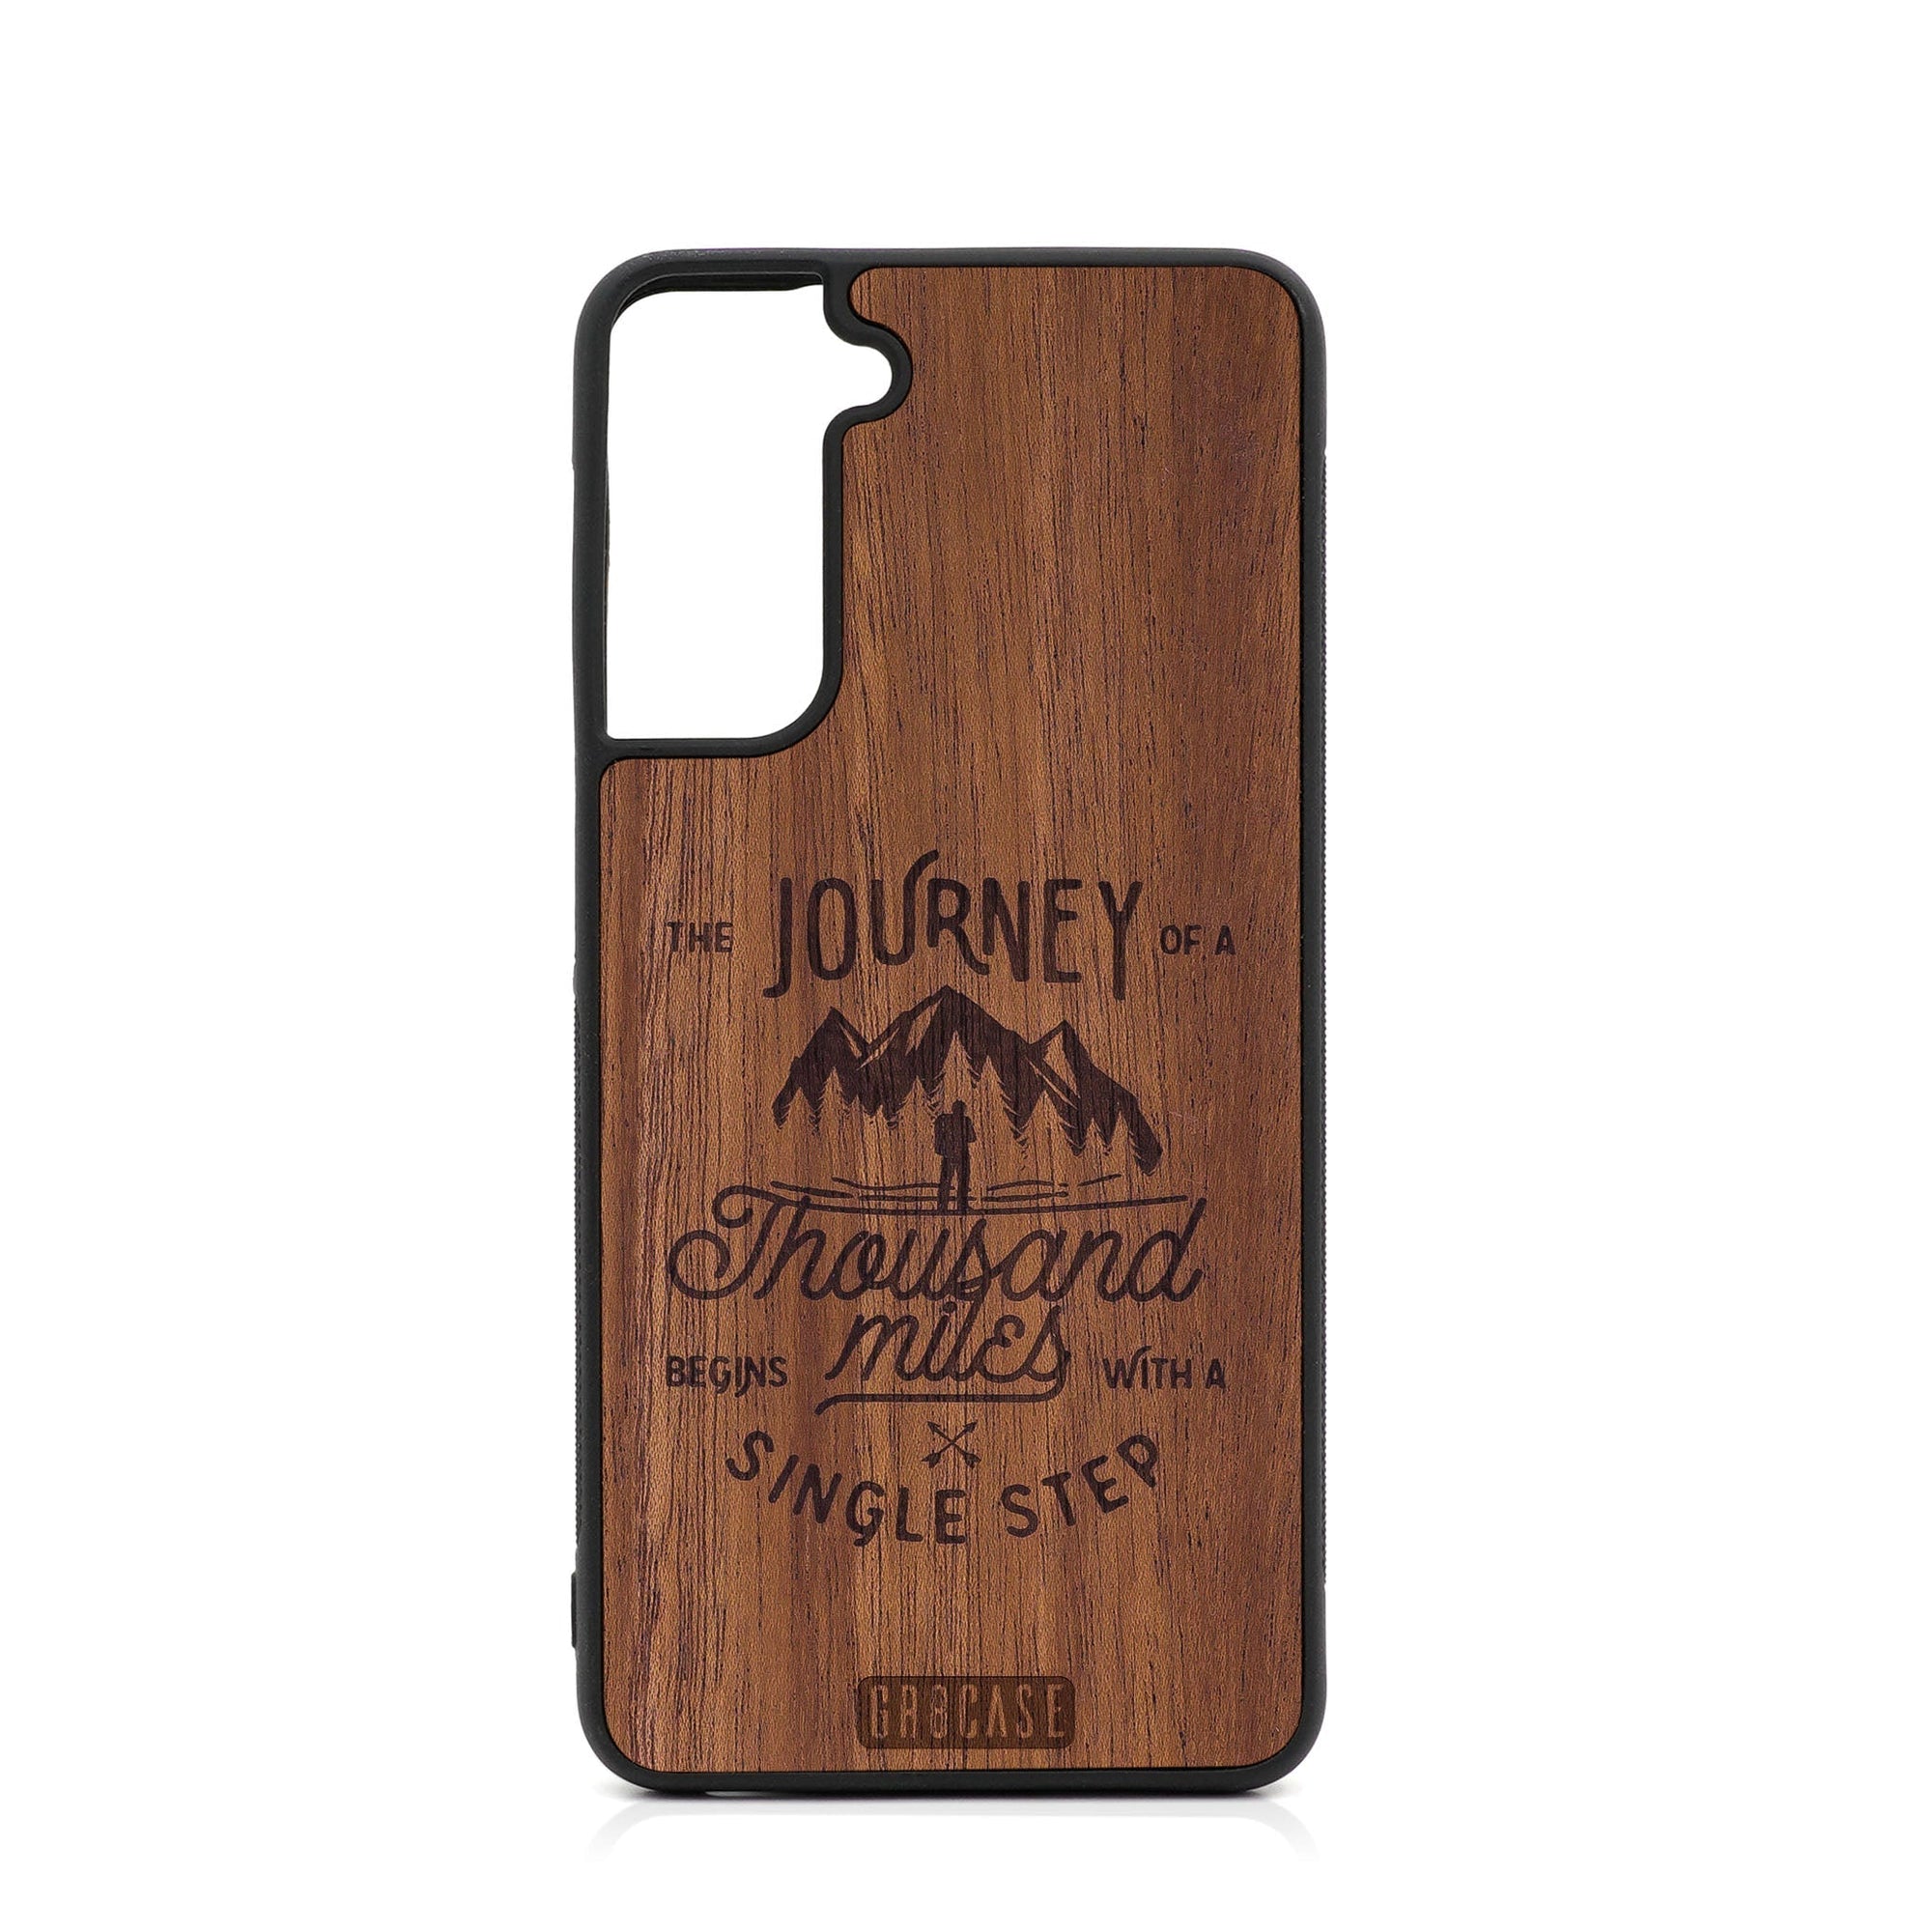 The Journey of A Thousand Miles Begins With A Single Step Design Wood Case For Samsung Galaxy S21 FE 5G